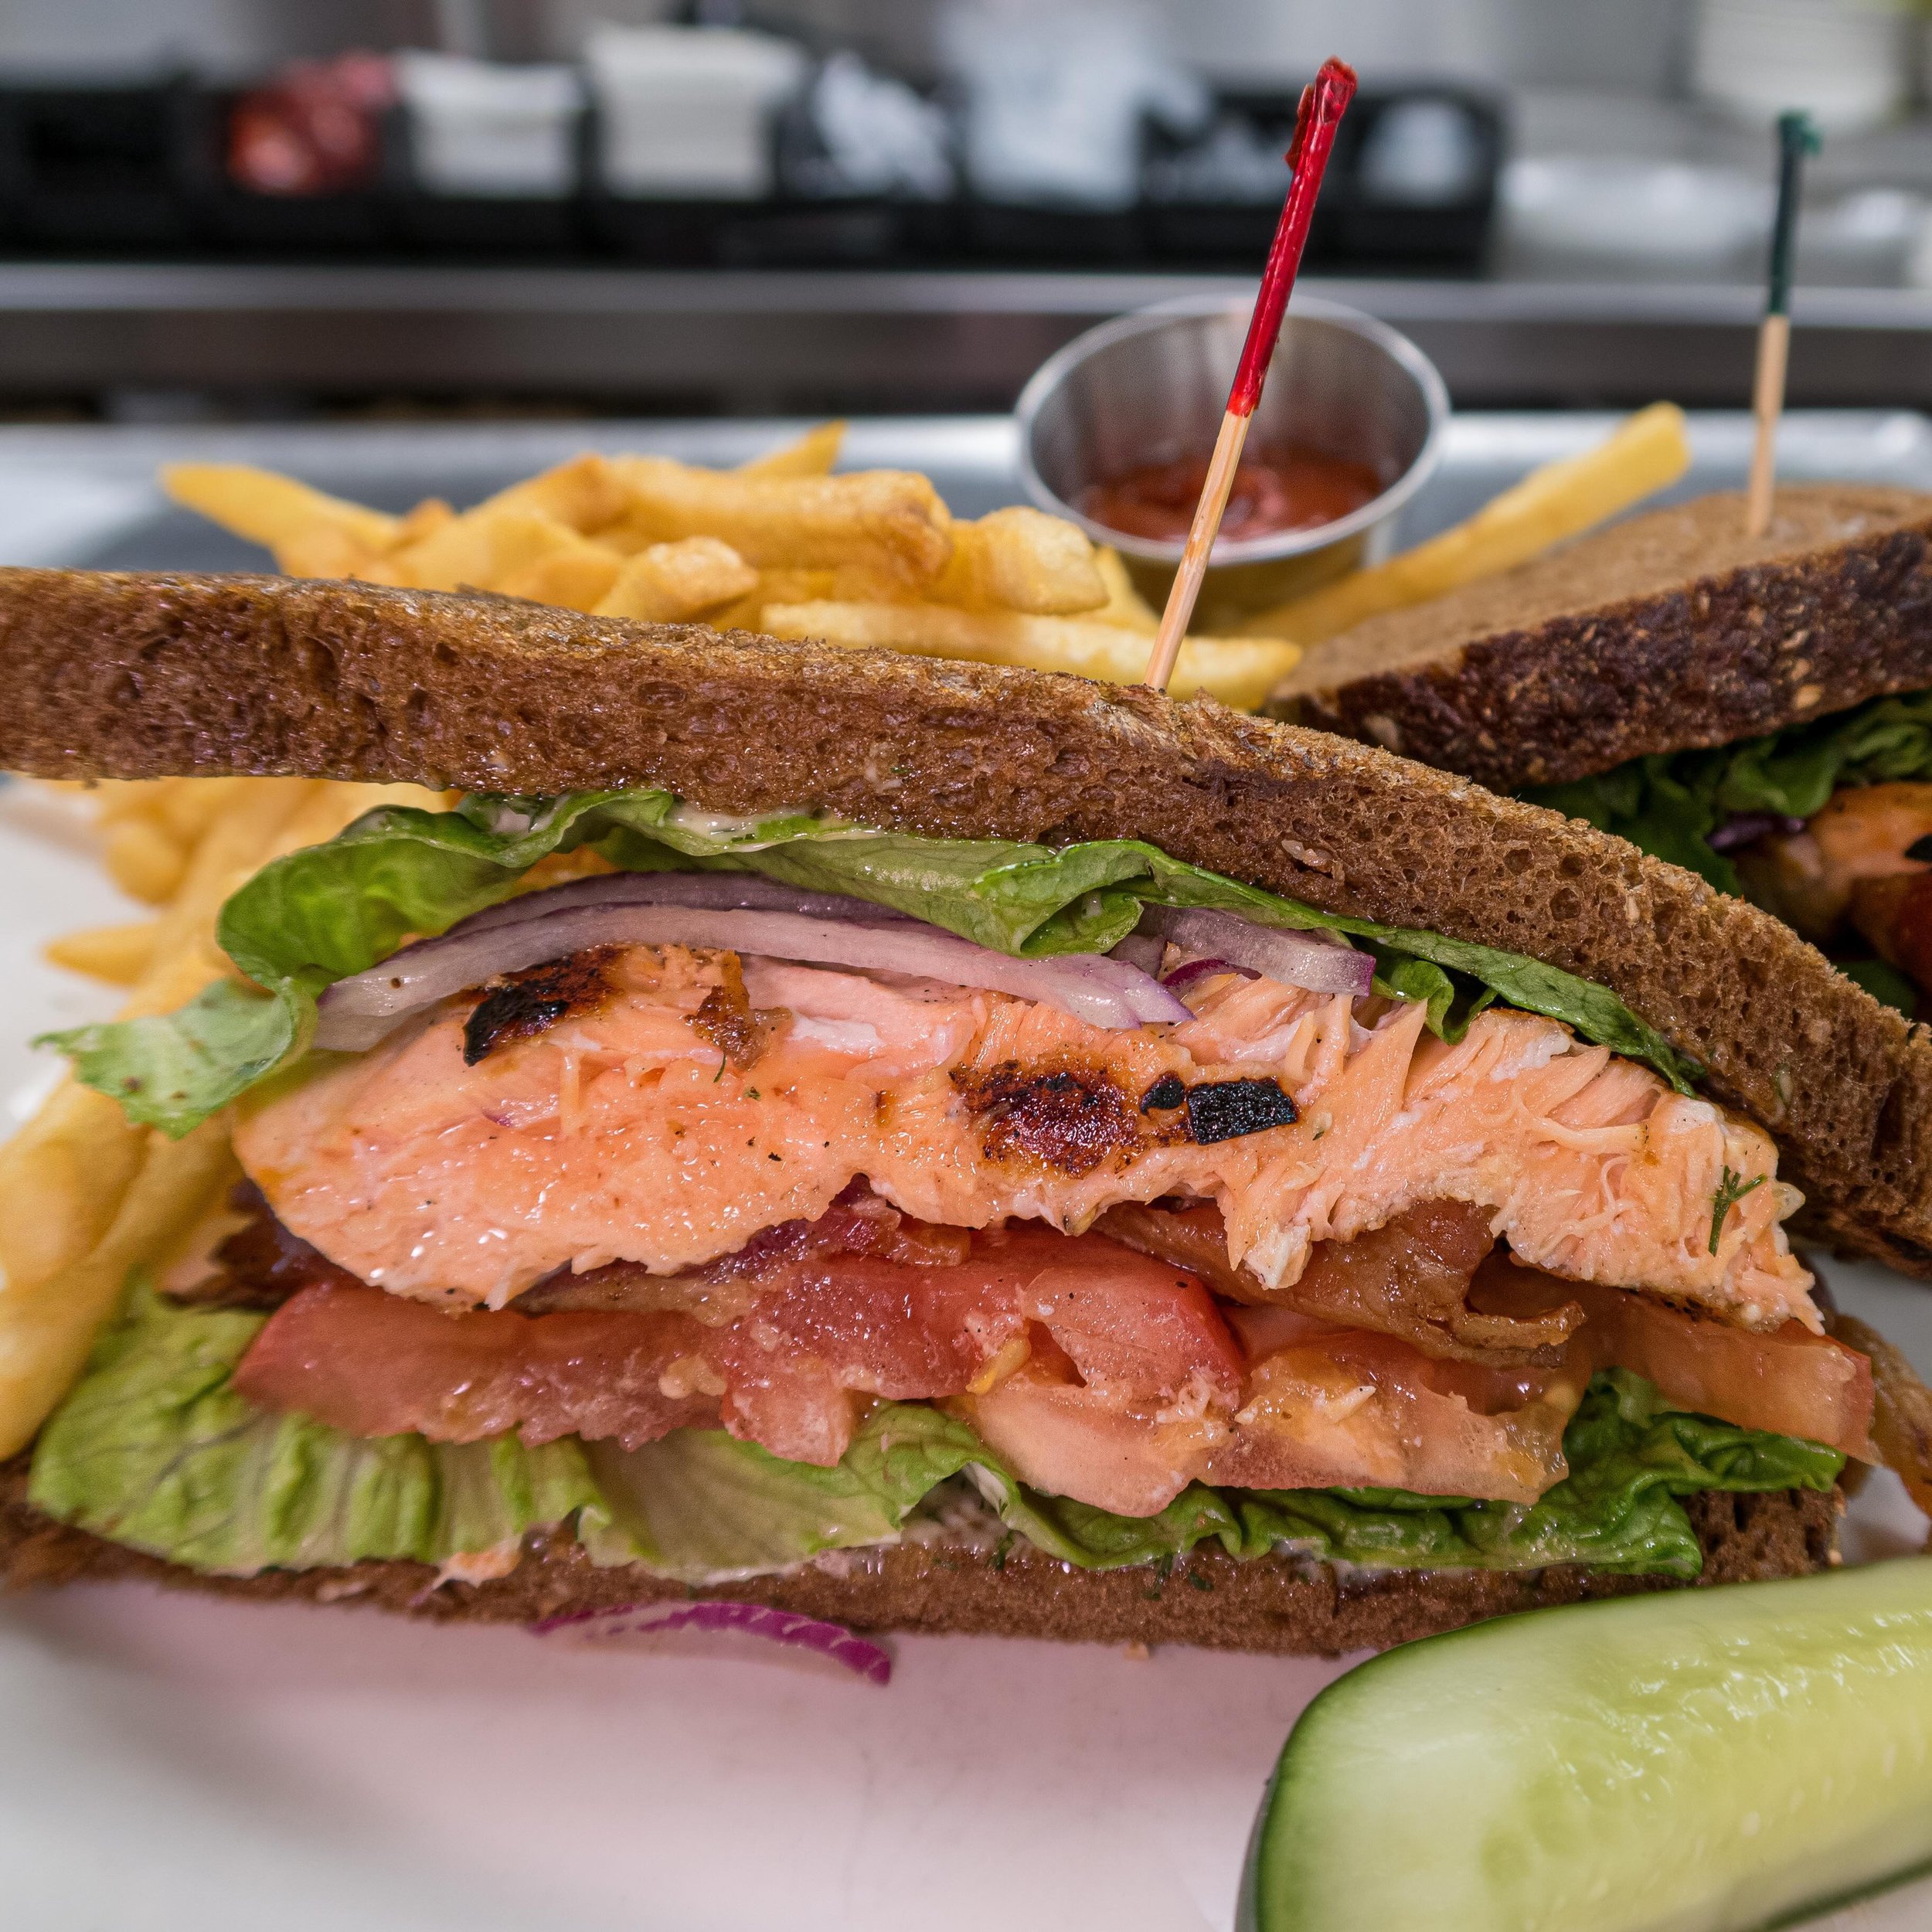 Salmon? Say less.

Ruby&rsquo;s Oyster Bar &amp; Bistro 
45 Purchase Street Rye, NY 10580
914 921 4166

#foodie #westchestereats #914eats #914food #westchesternyeats